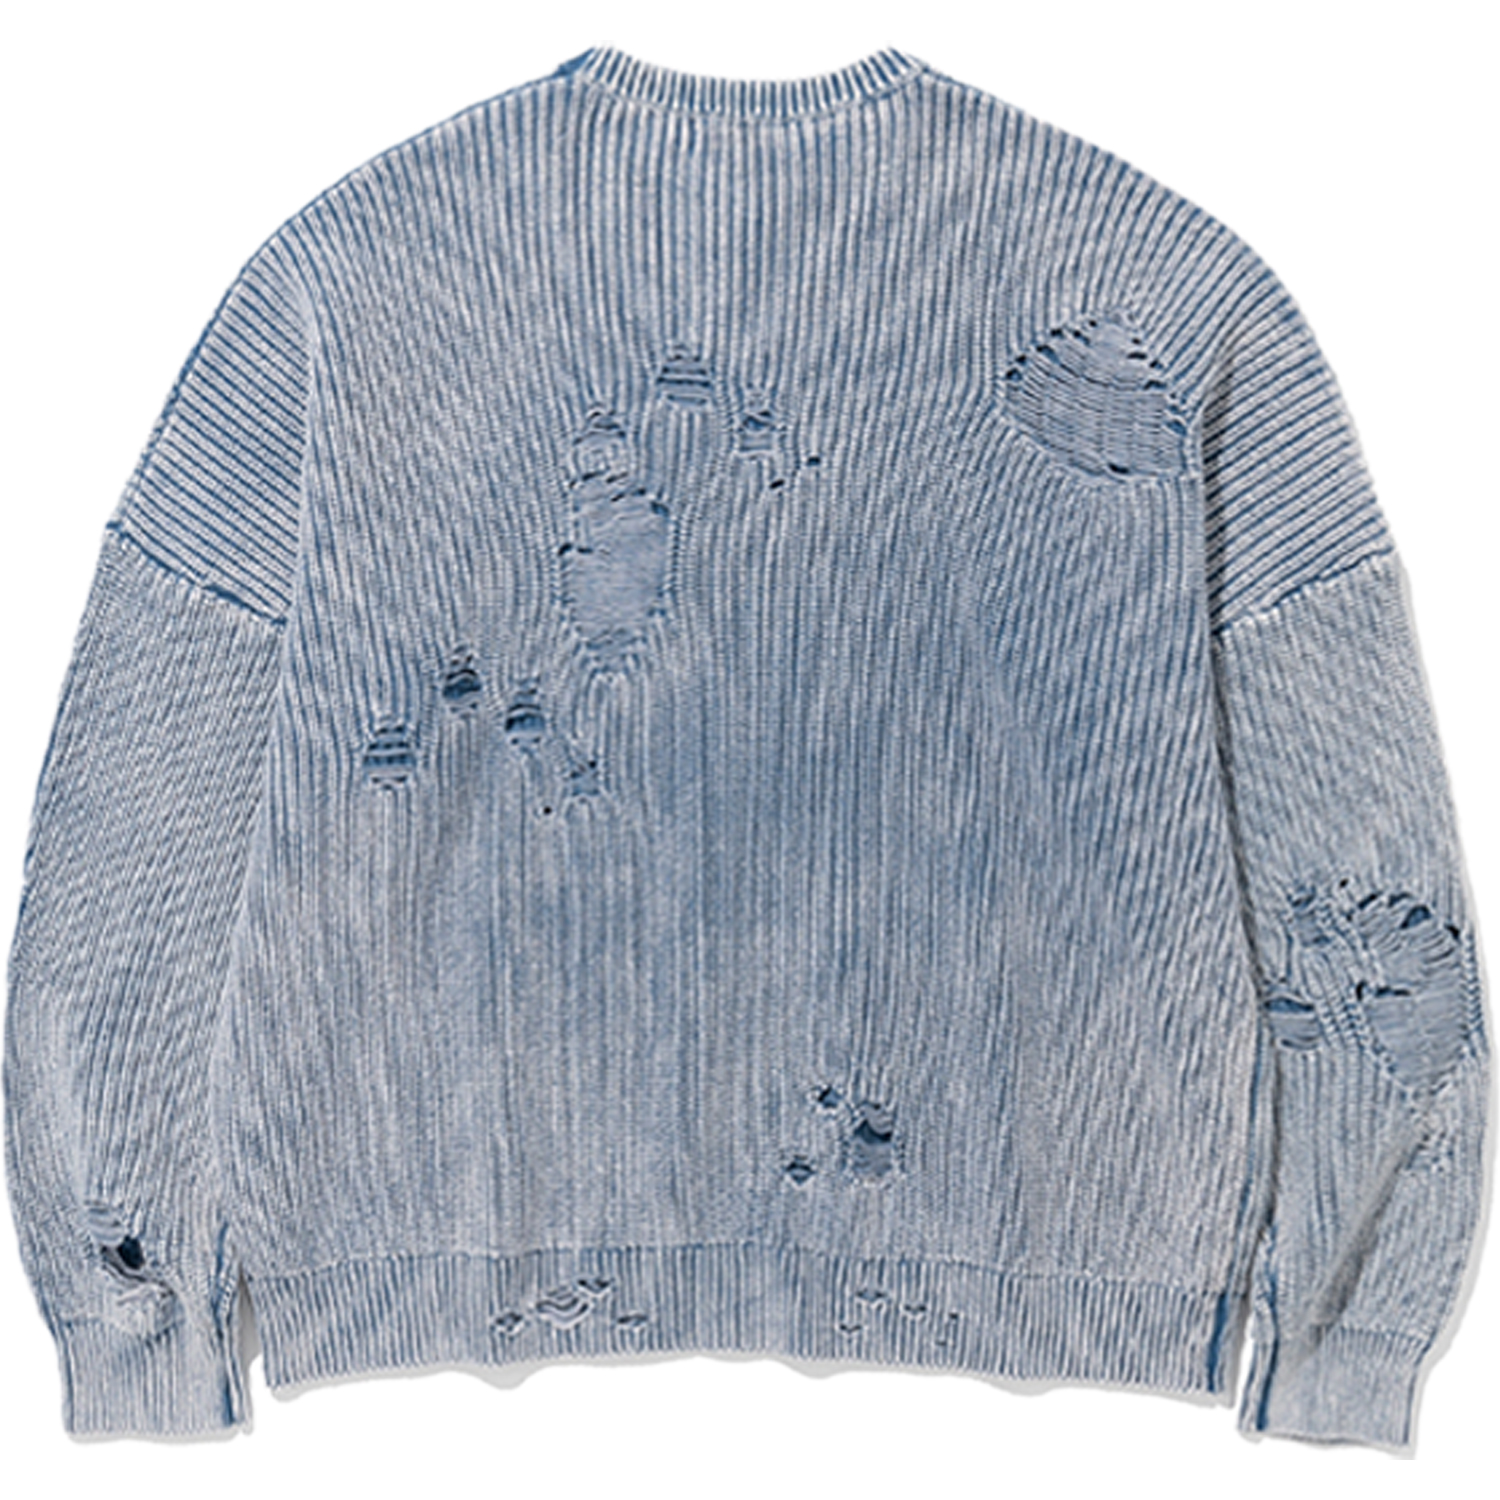 Pigment Dyeing Destroyed Knit Sweater - Blue,NOT4NERD